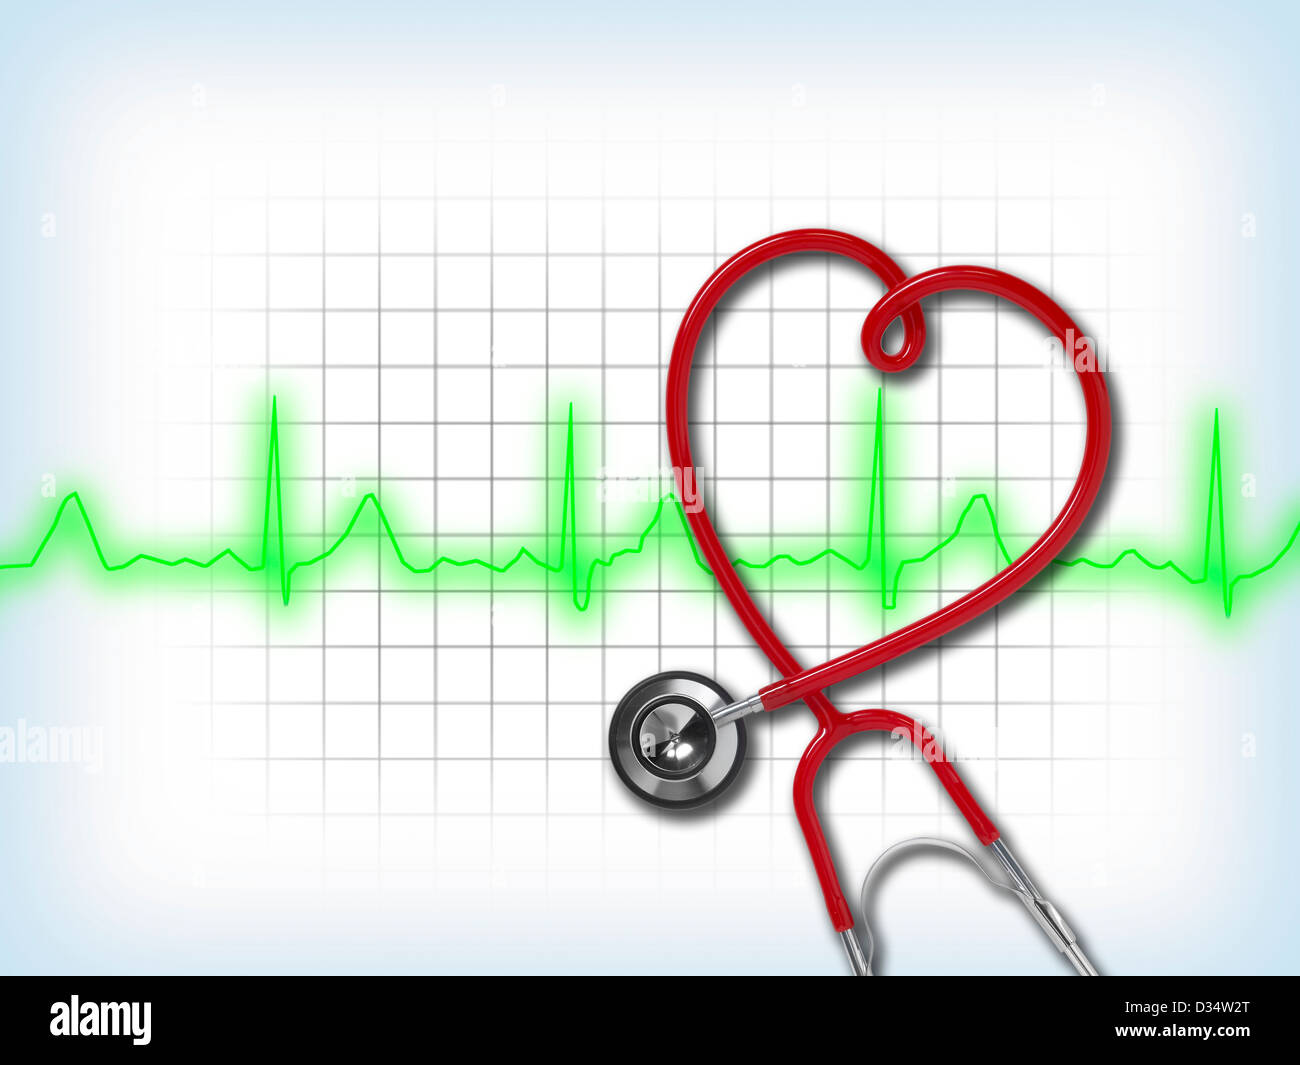 Heart Stethoscope With Cardiogram Stock Photo